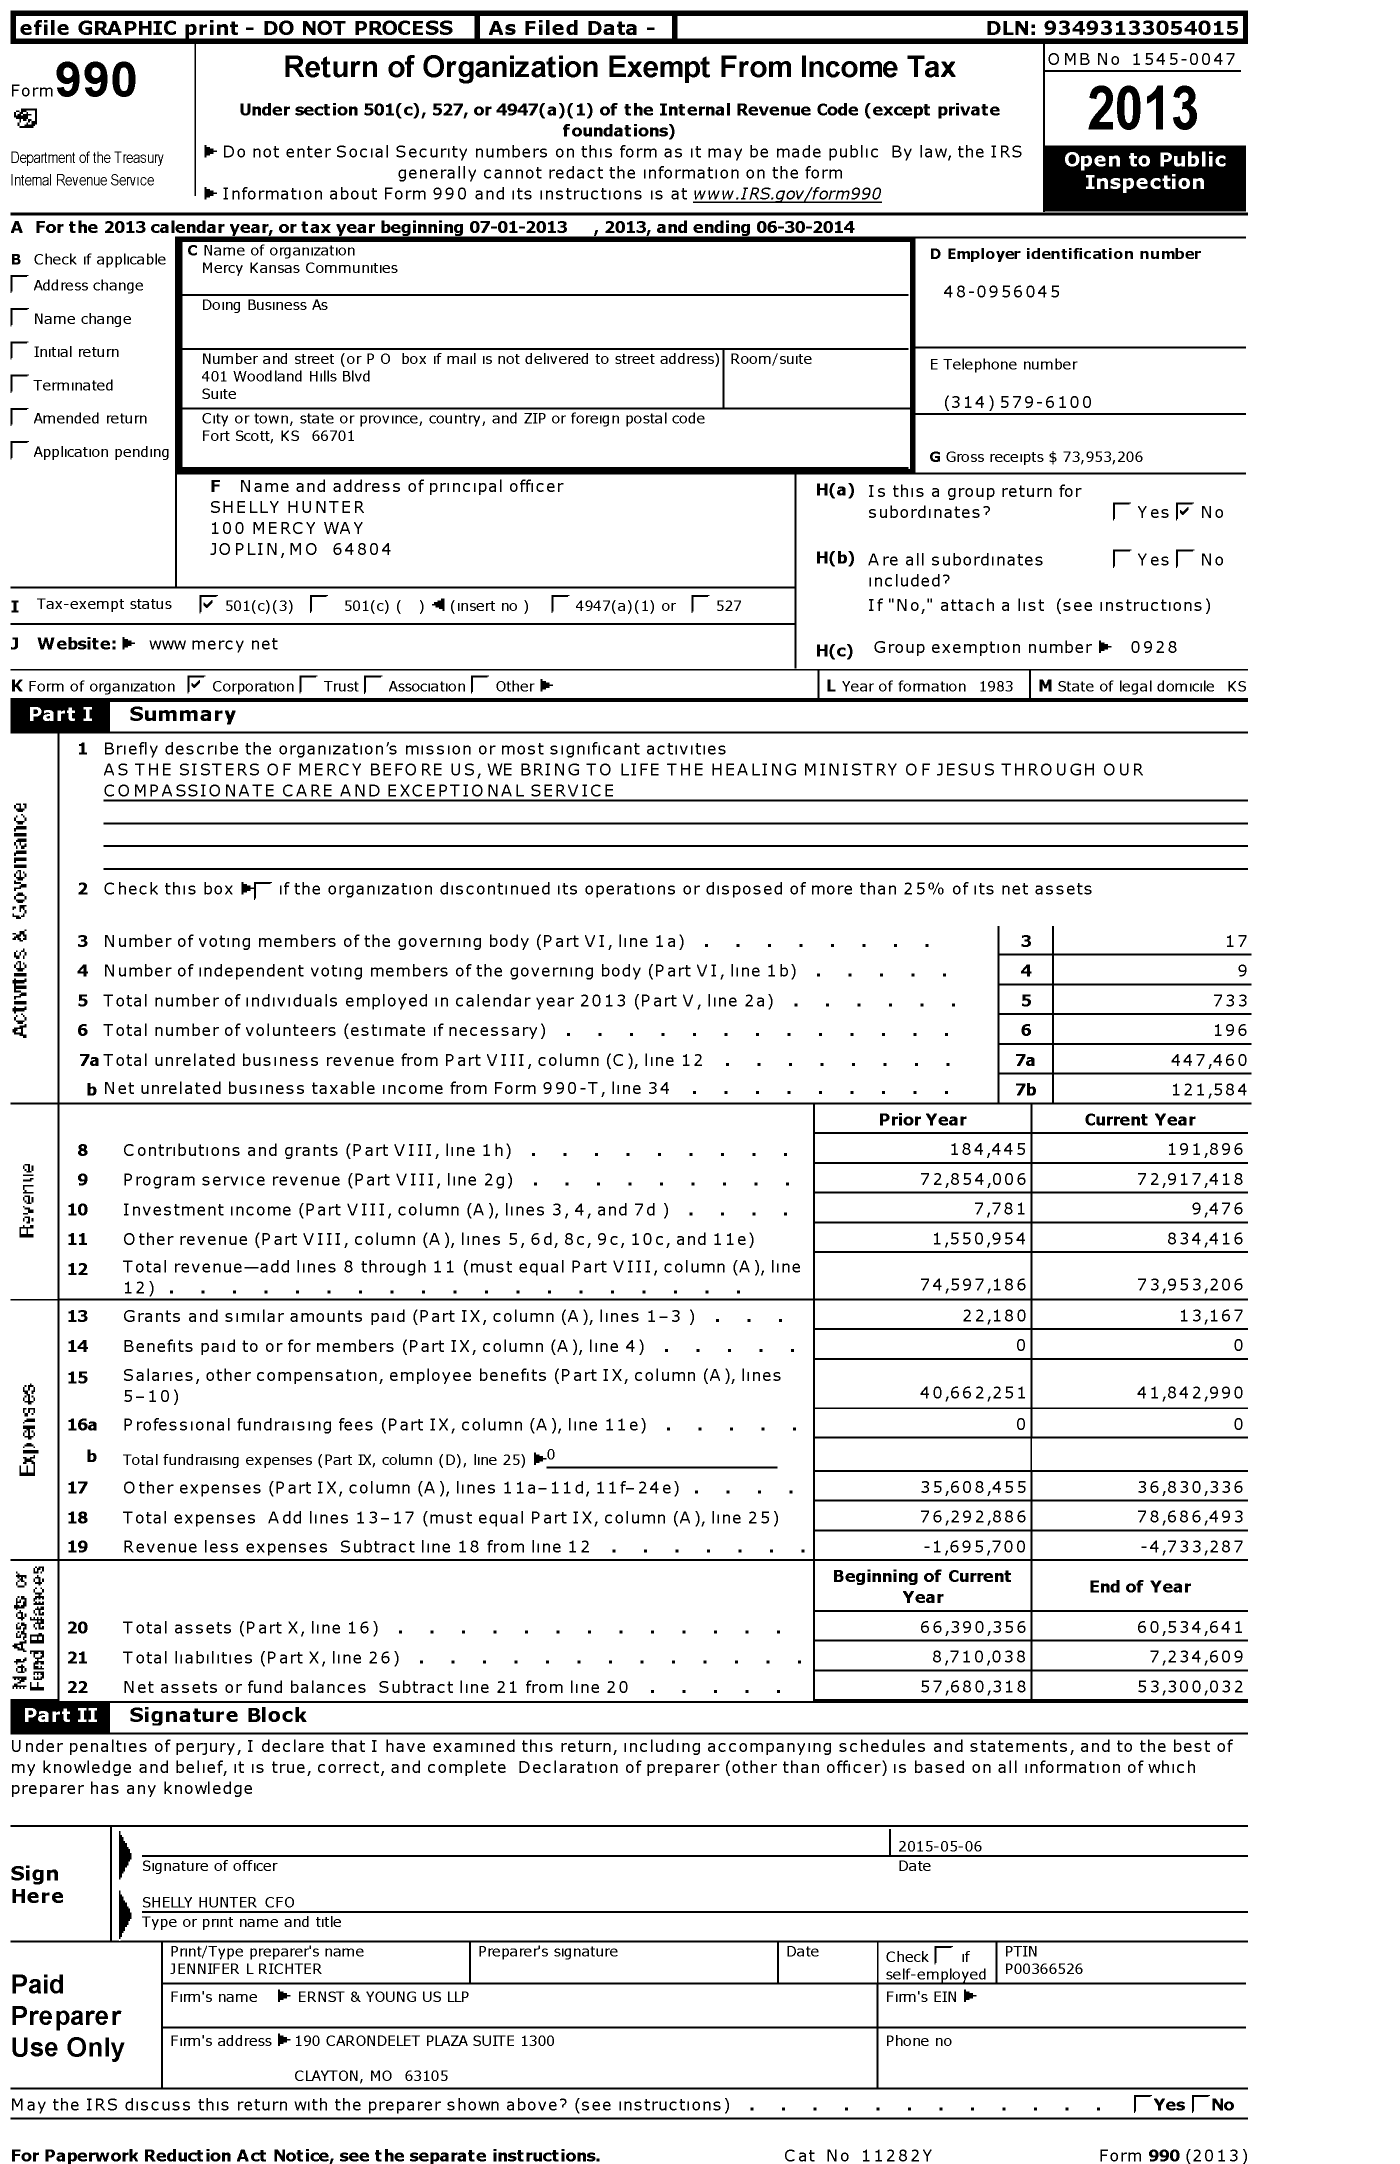 Image of first page of 2013 Form 990 for Mercy Kansas Communities